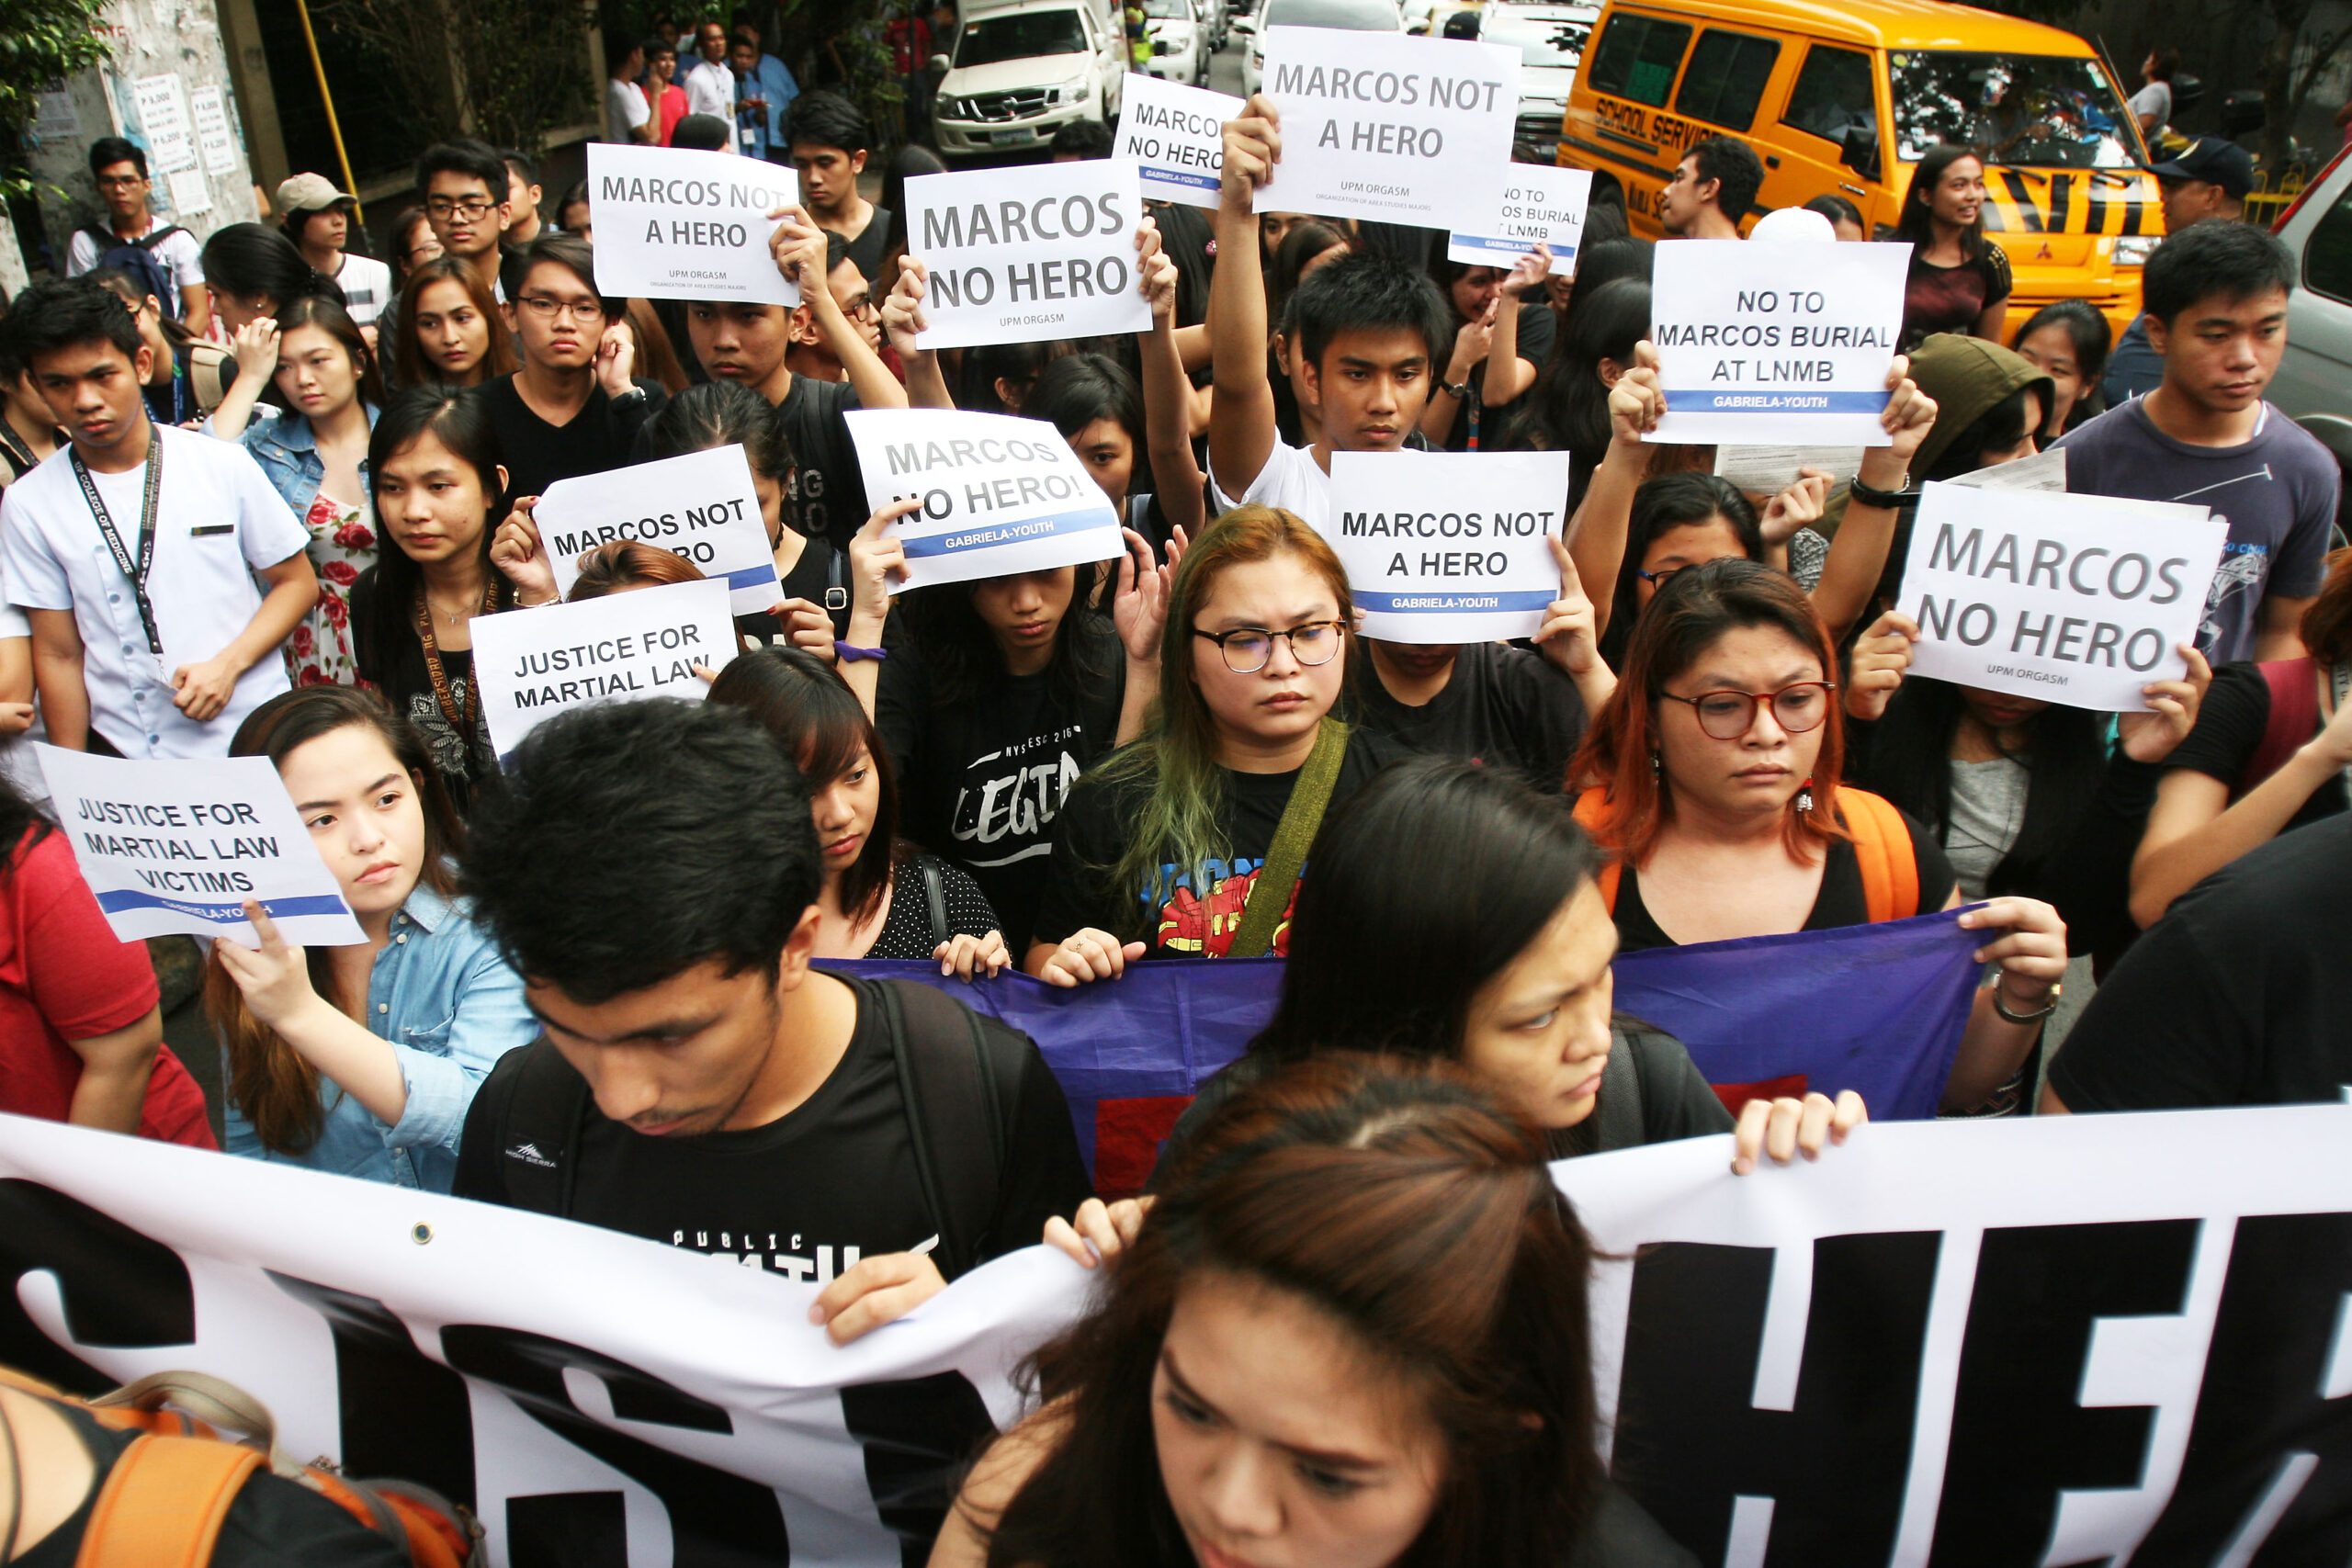 Framers of Constitution condemn Marcos burial, draw hope from youth